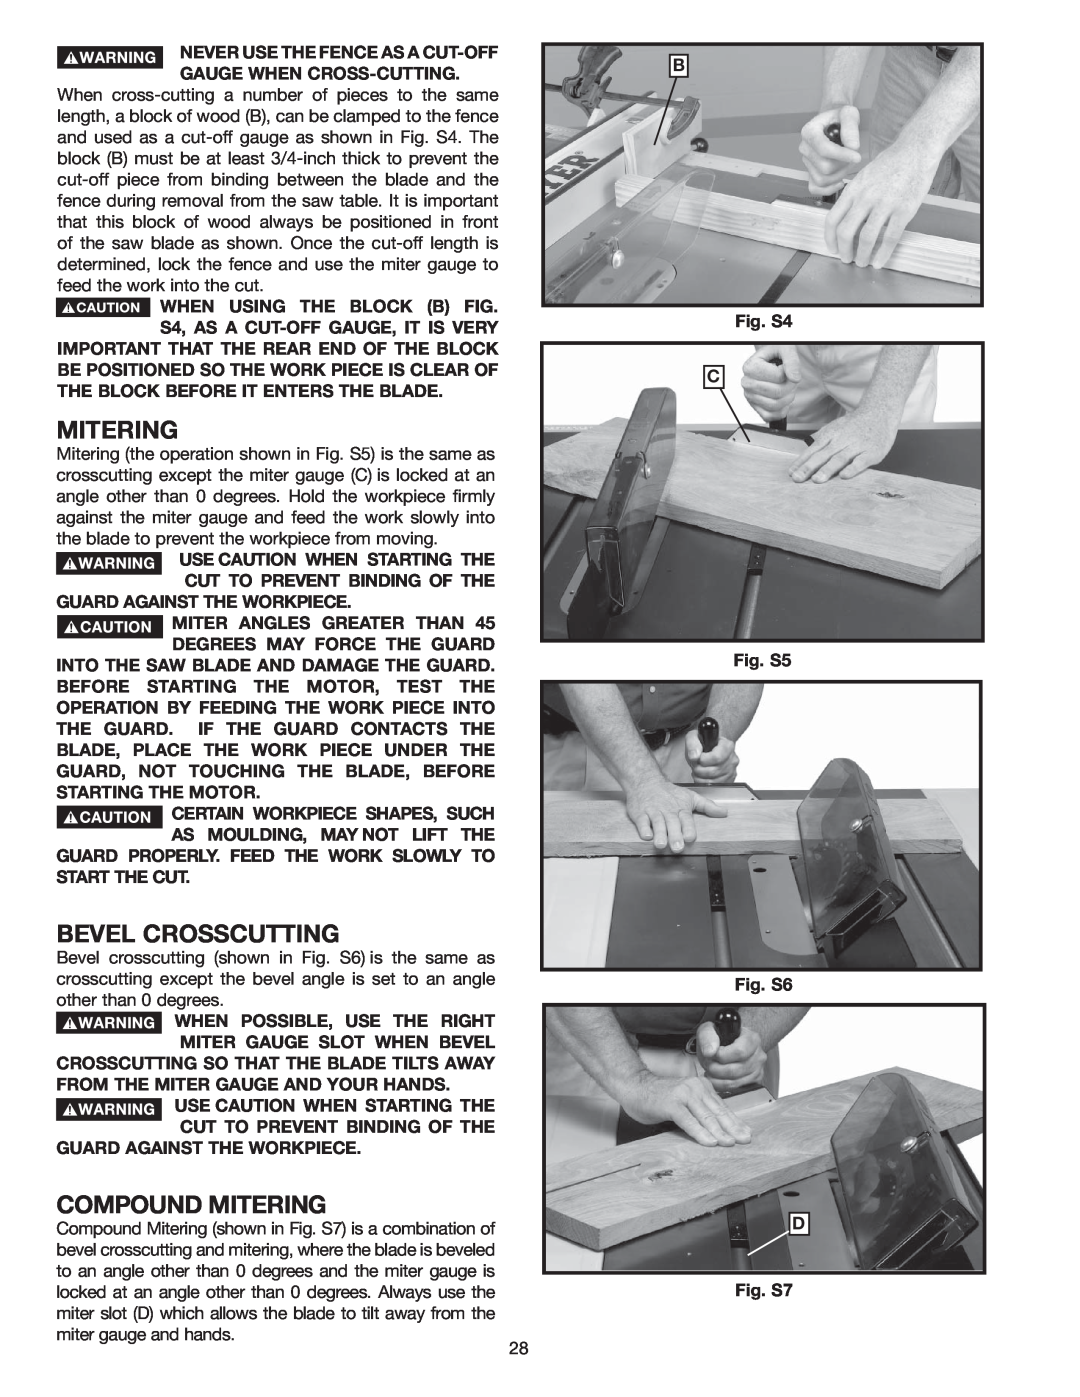 Delta 36-978 instruction manual Bevel Crosscutting, Compound Mitering 